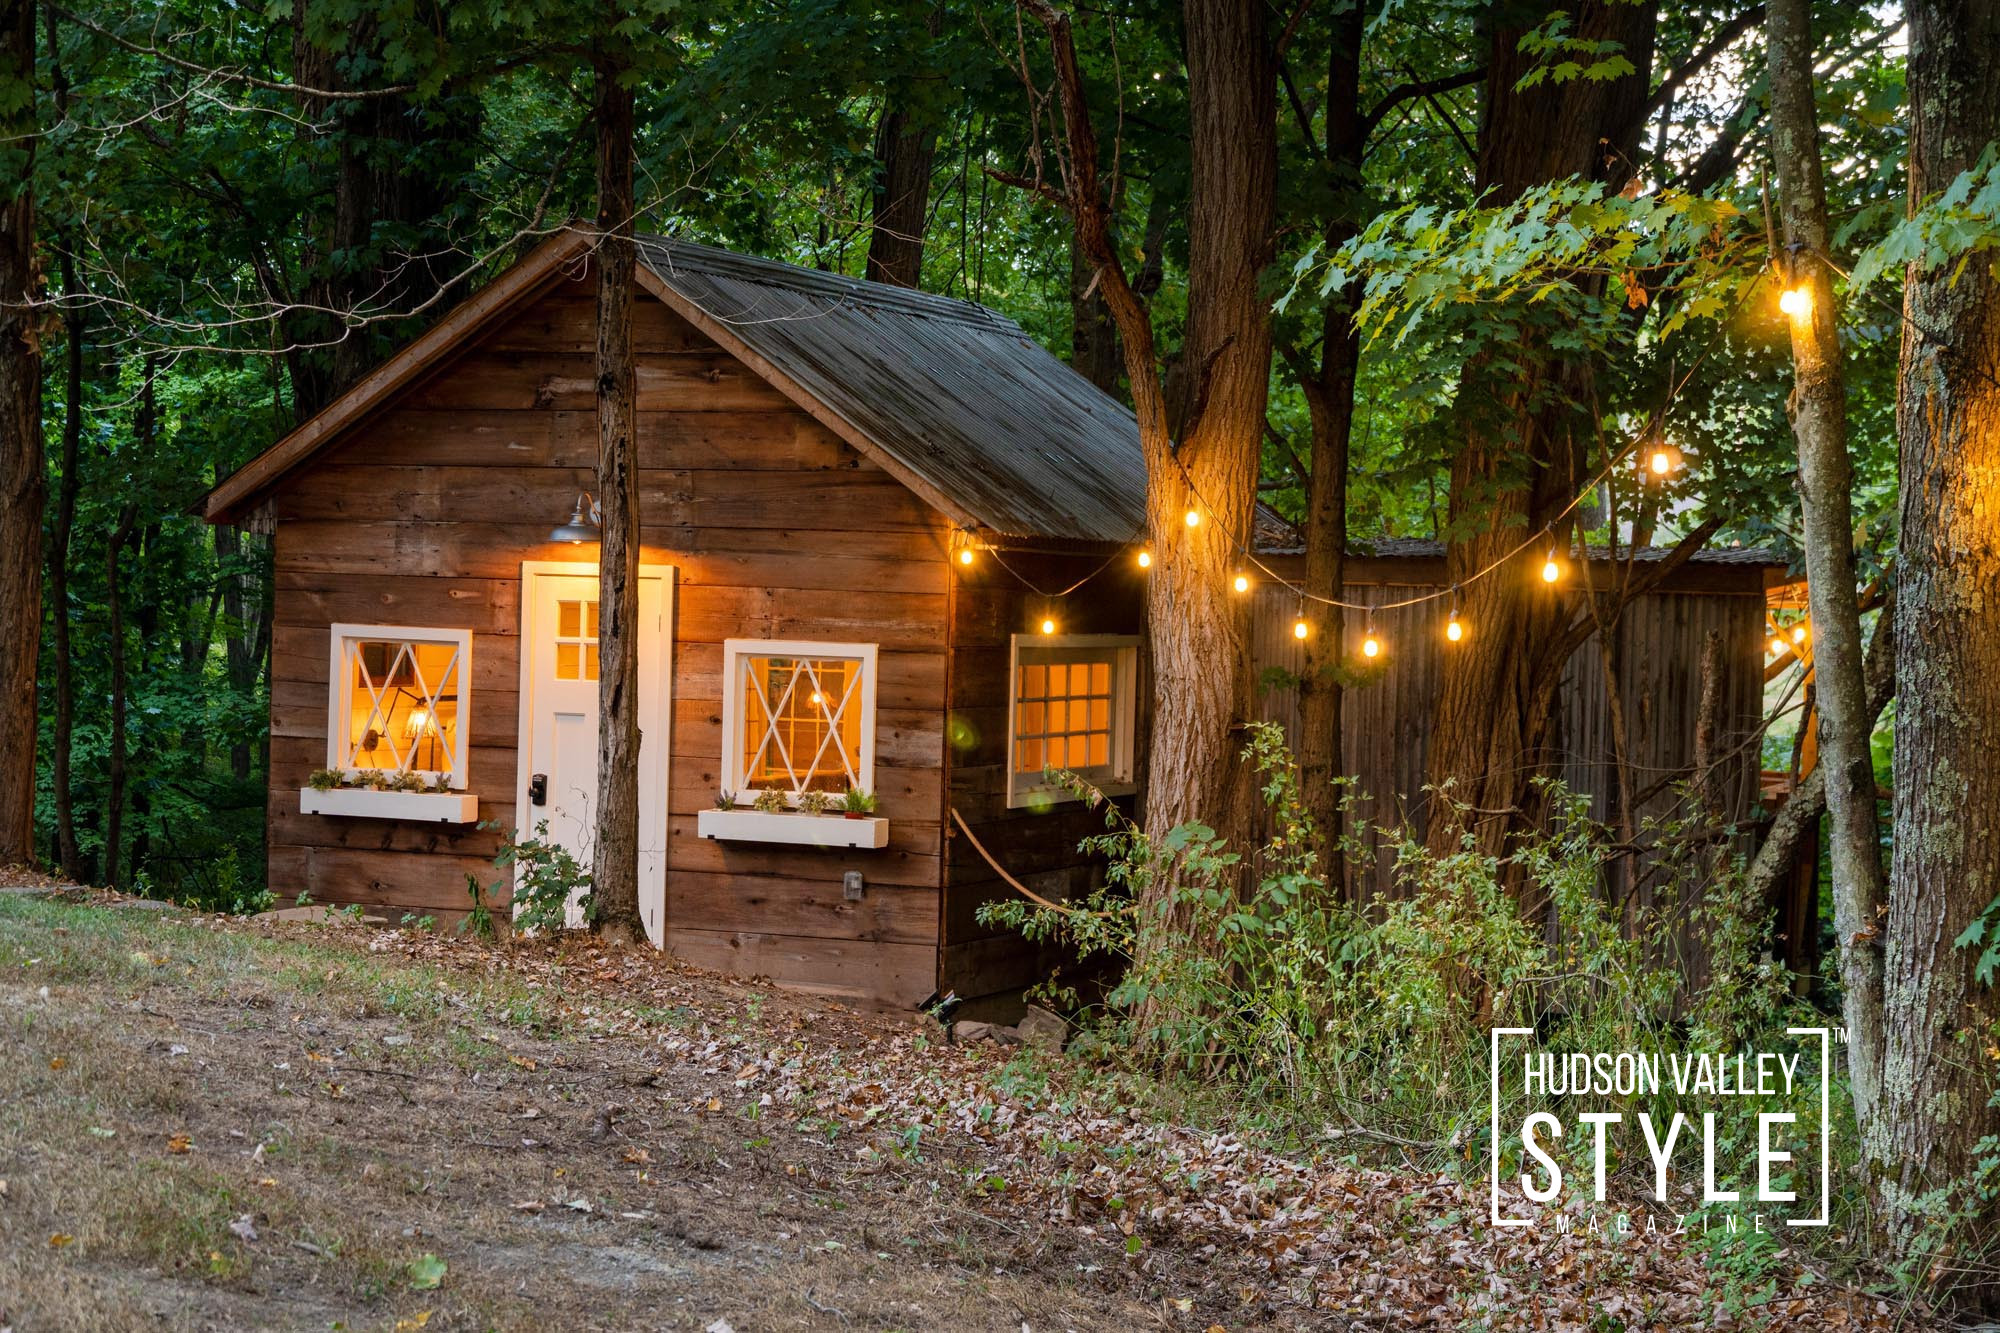 Apsley Hill Farm's Rustic Treehouse with a Claw Tub – Airbnb Review by Photographer Maxwell Alexander – Presented by ALLUVION MEDIA – The Best Airbnb Photography in the Hudson Valley, Catskills, NYC, and Hamptons